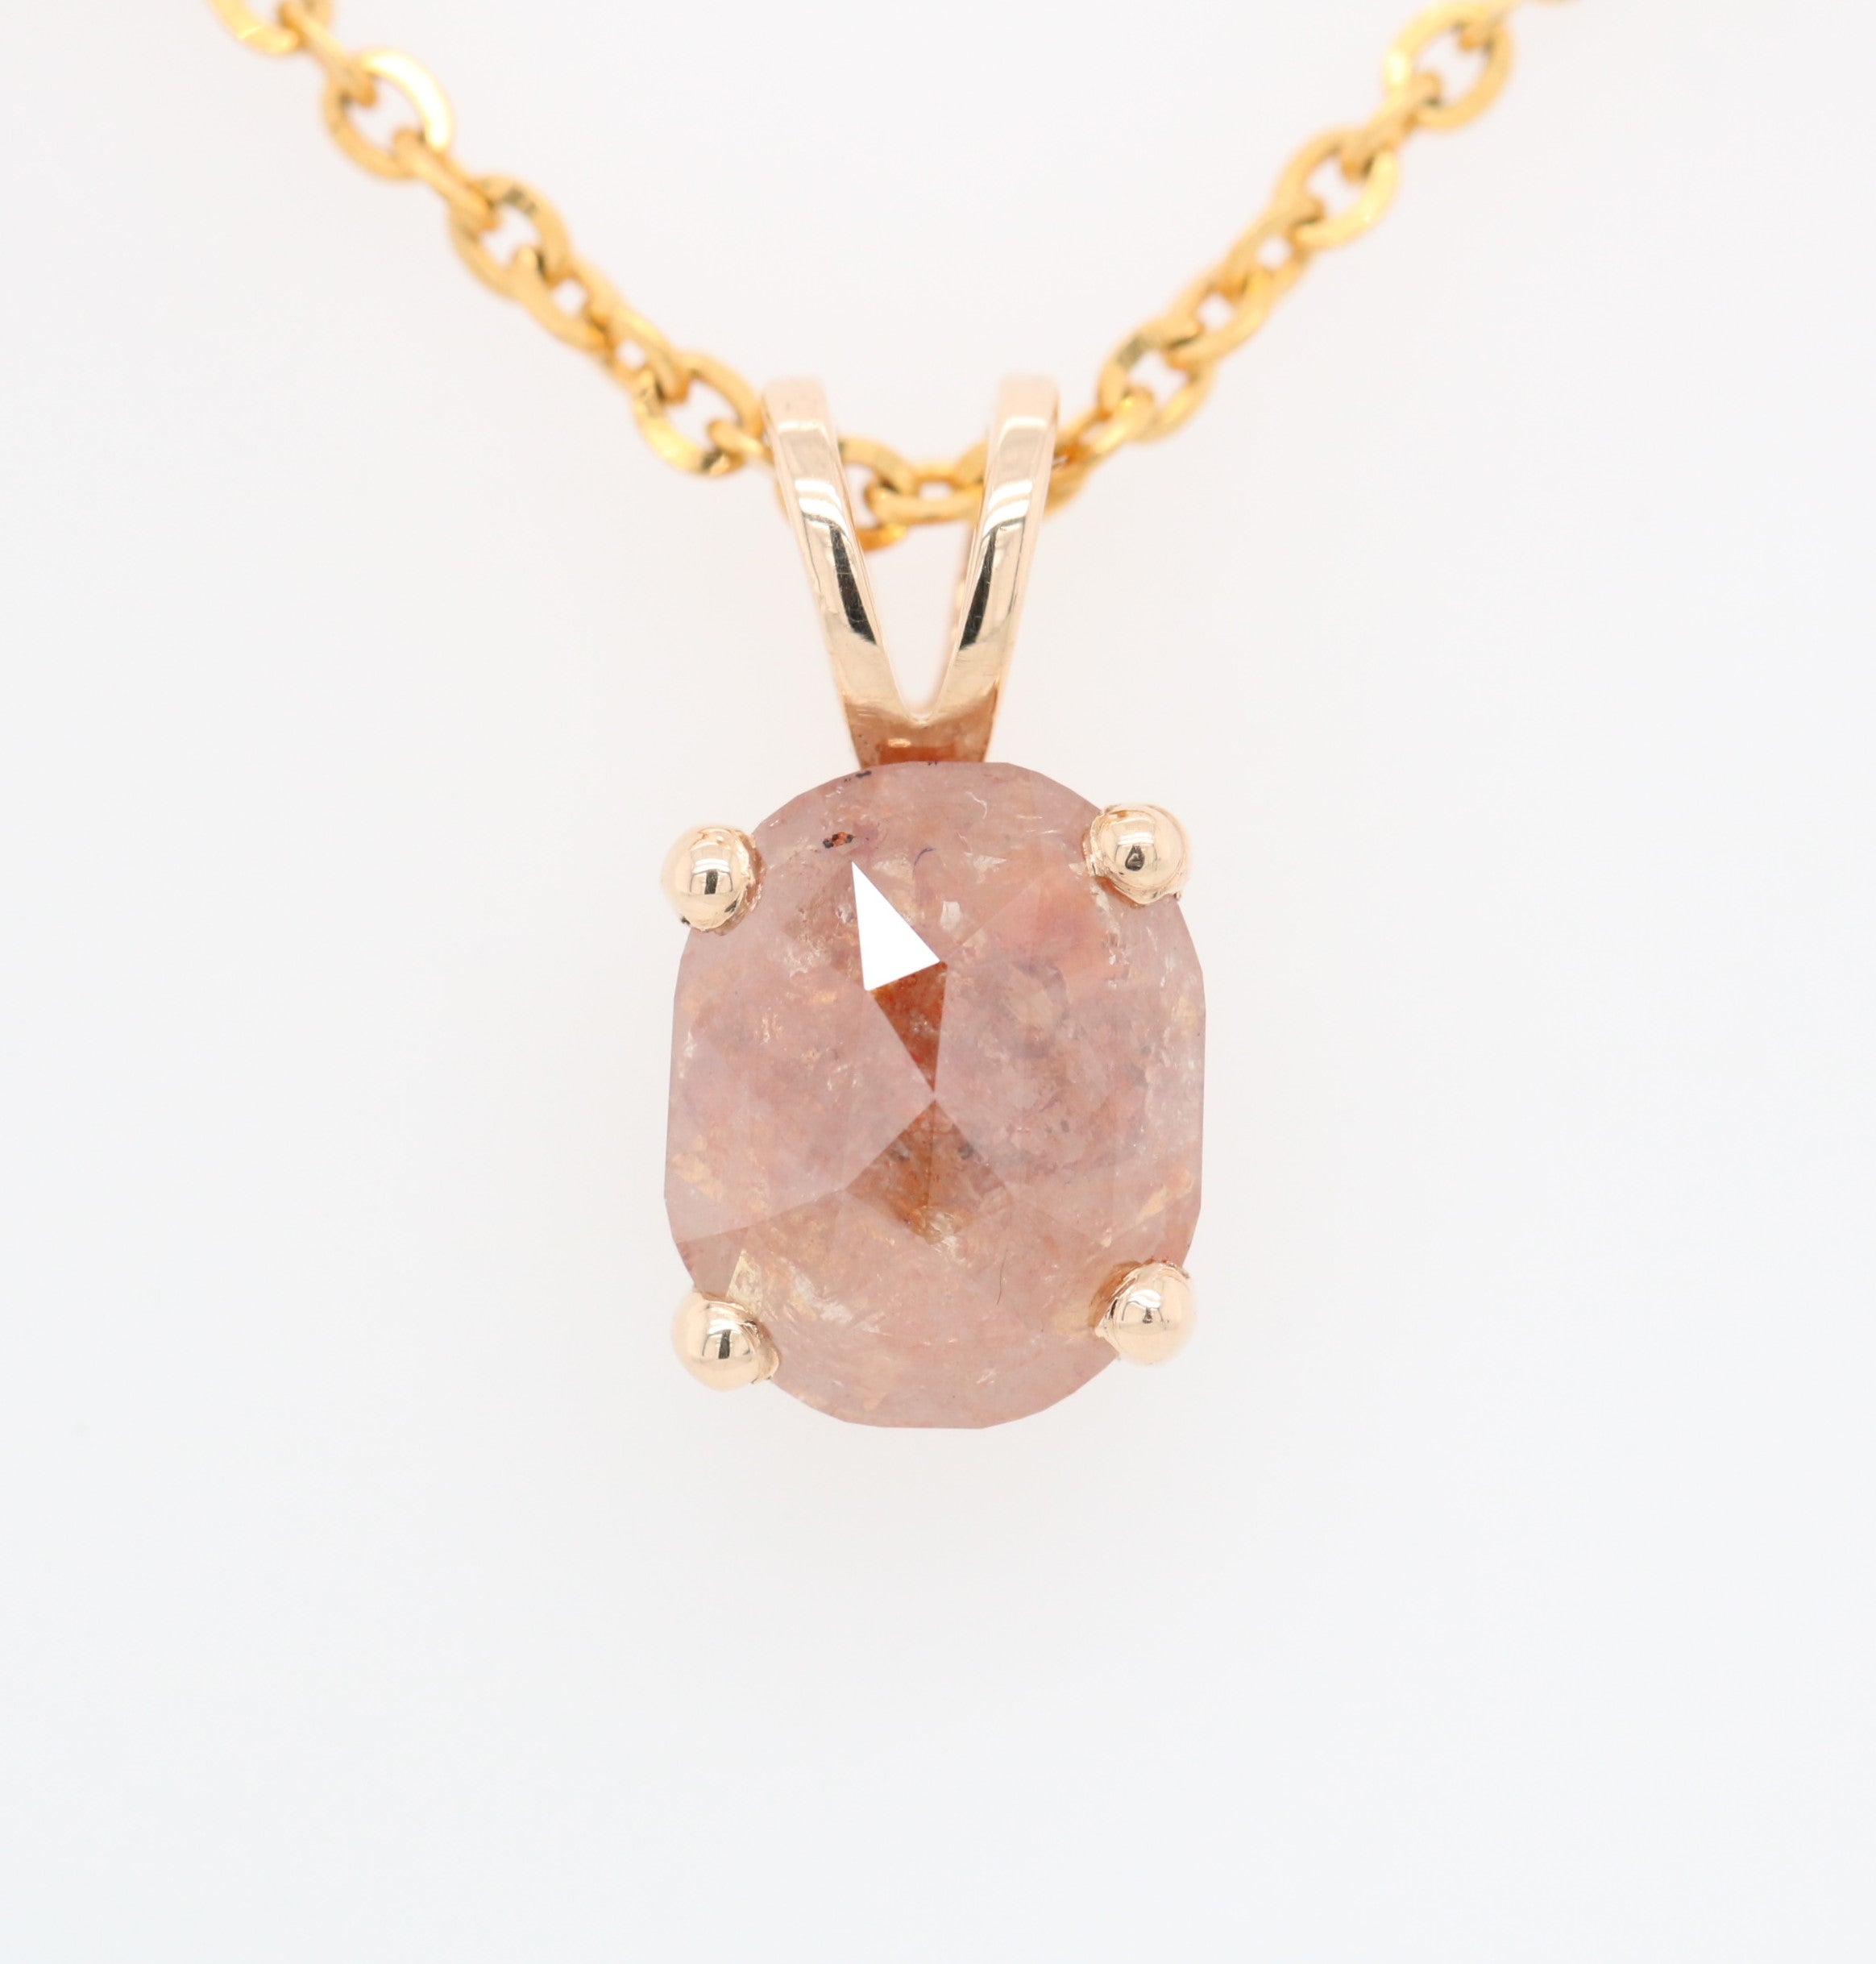 Oval Shape Peach Diamond Pendant with 18K Yellow Gold Chain Necklace For Women